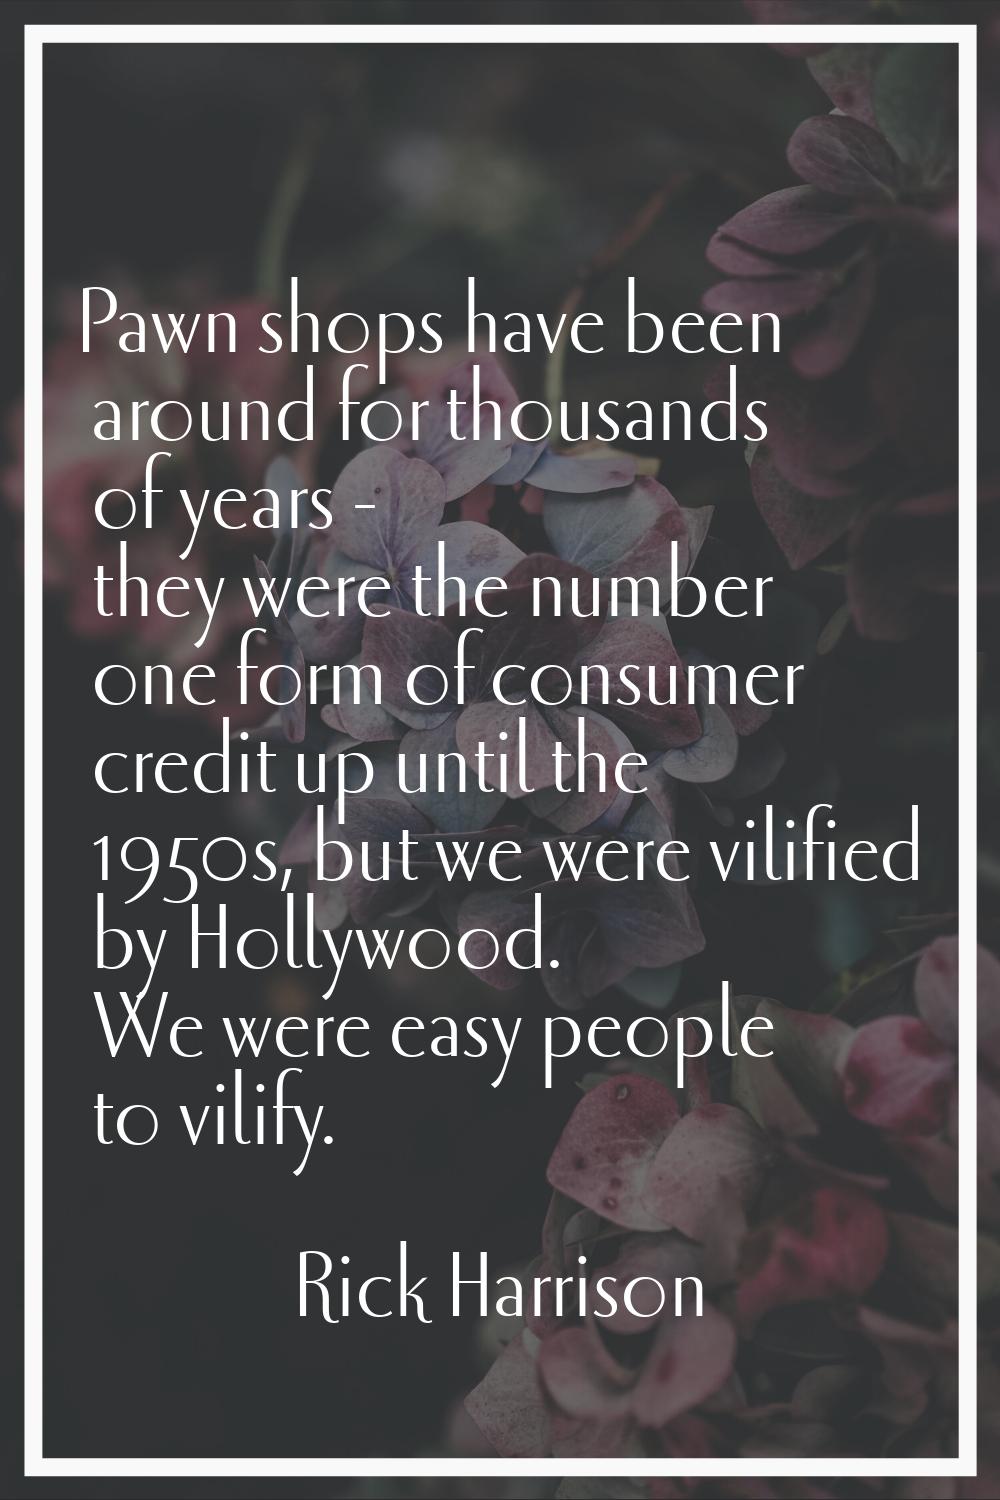 Pawn shops have been around for thousands of years - they were the number one form of consumer cred